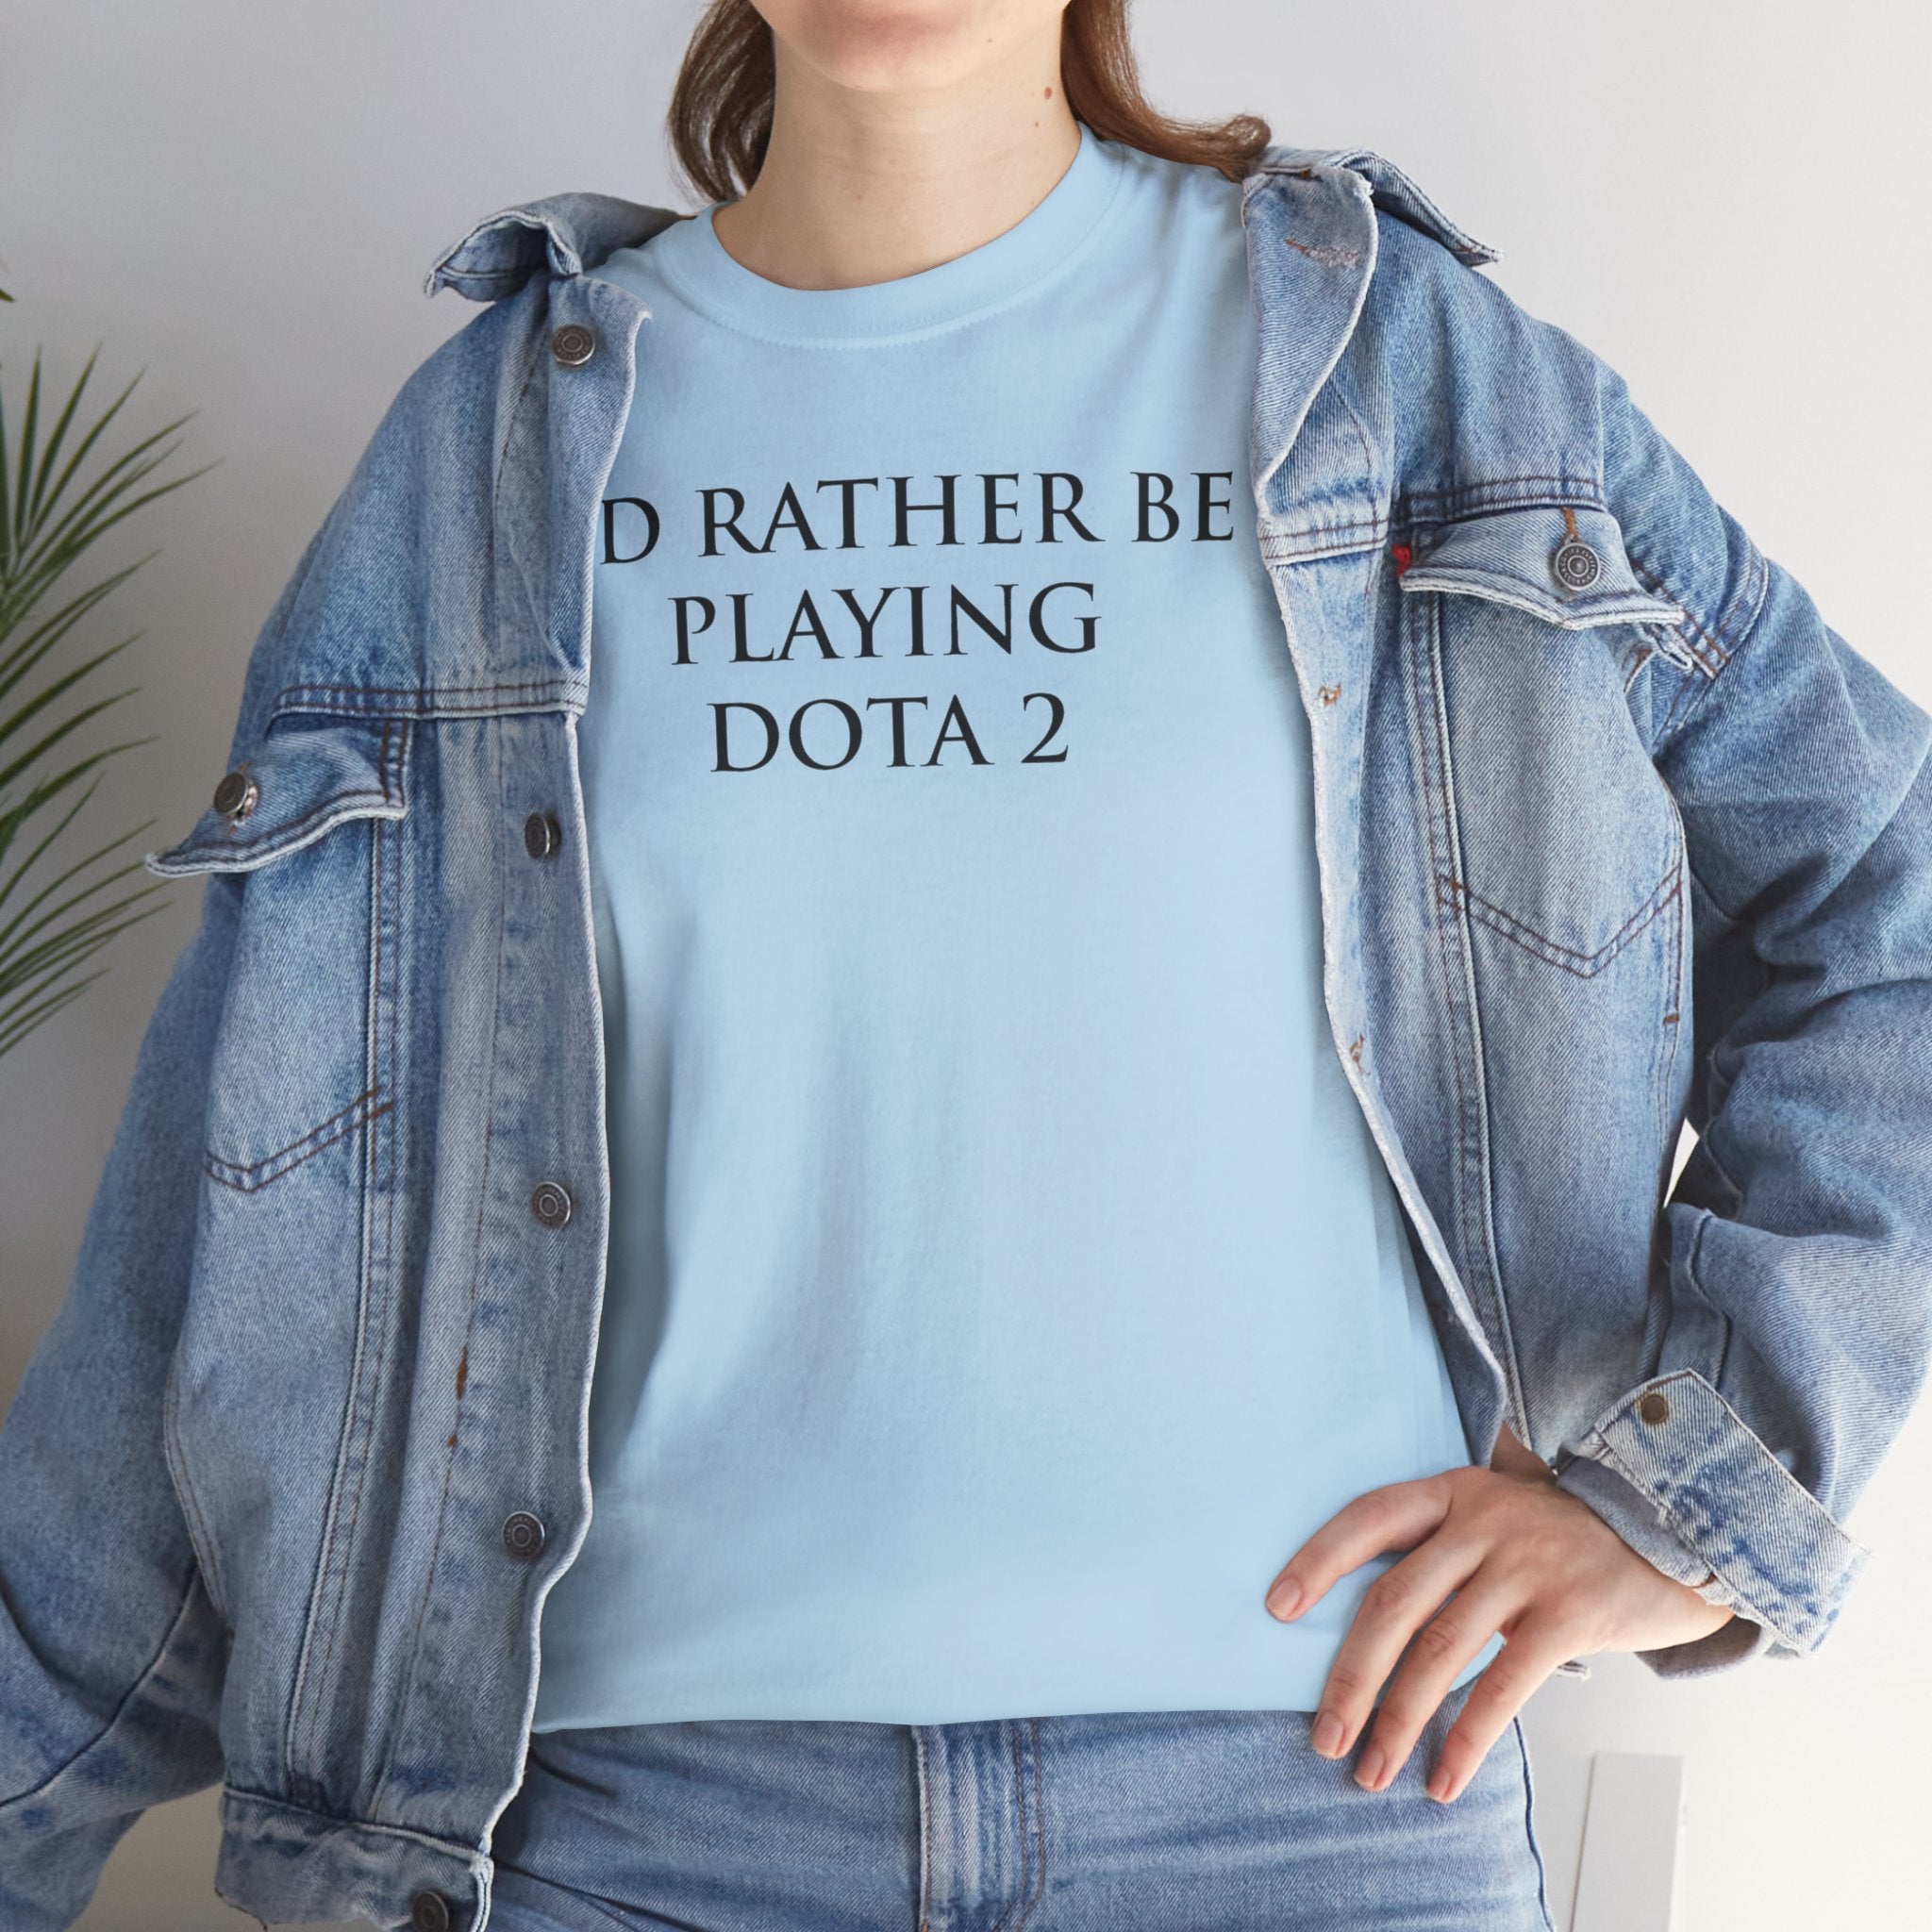 Dota 2 I'd Rather Be Playing Unisex Heavy Cotton Tee Shirt Tshirt T-shirt Gamer Gift For Him Her Game Cup Cups Mugs Birthday Christmas Valentine's Anniversary Gifts